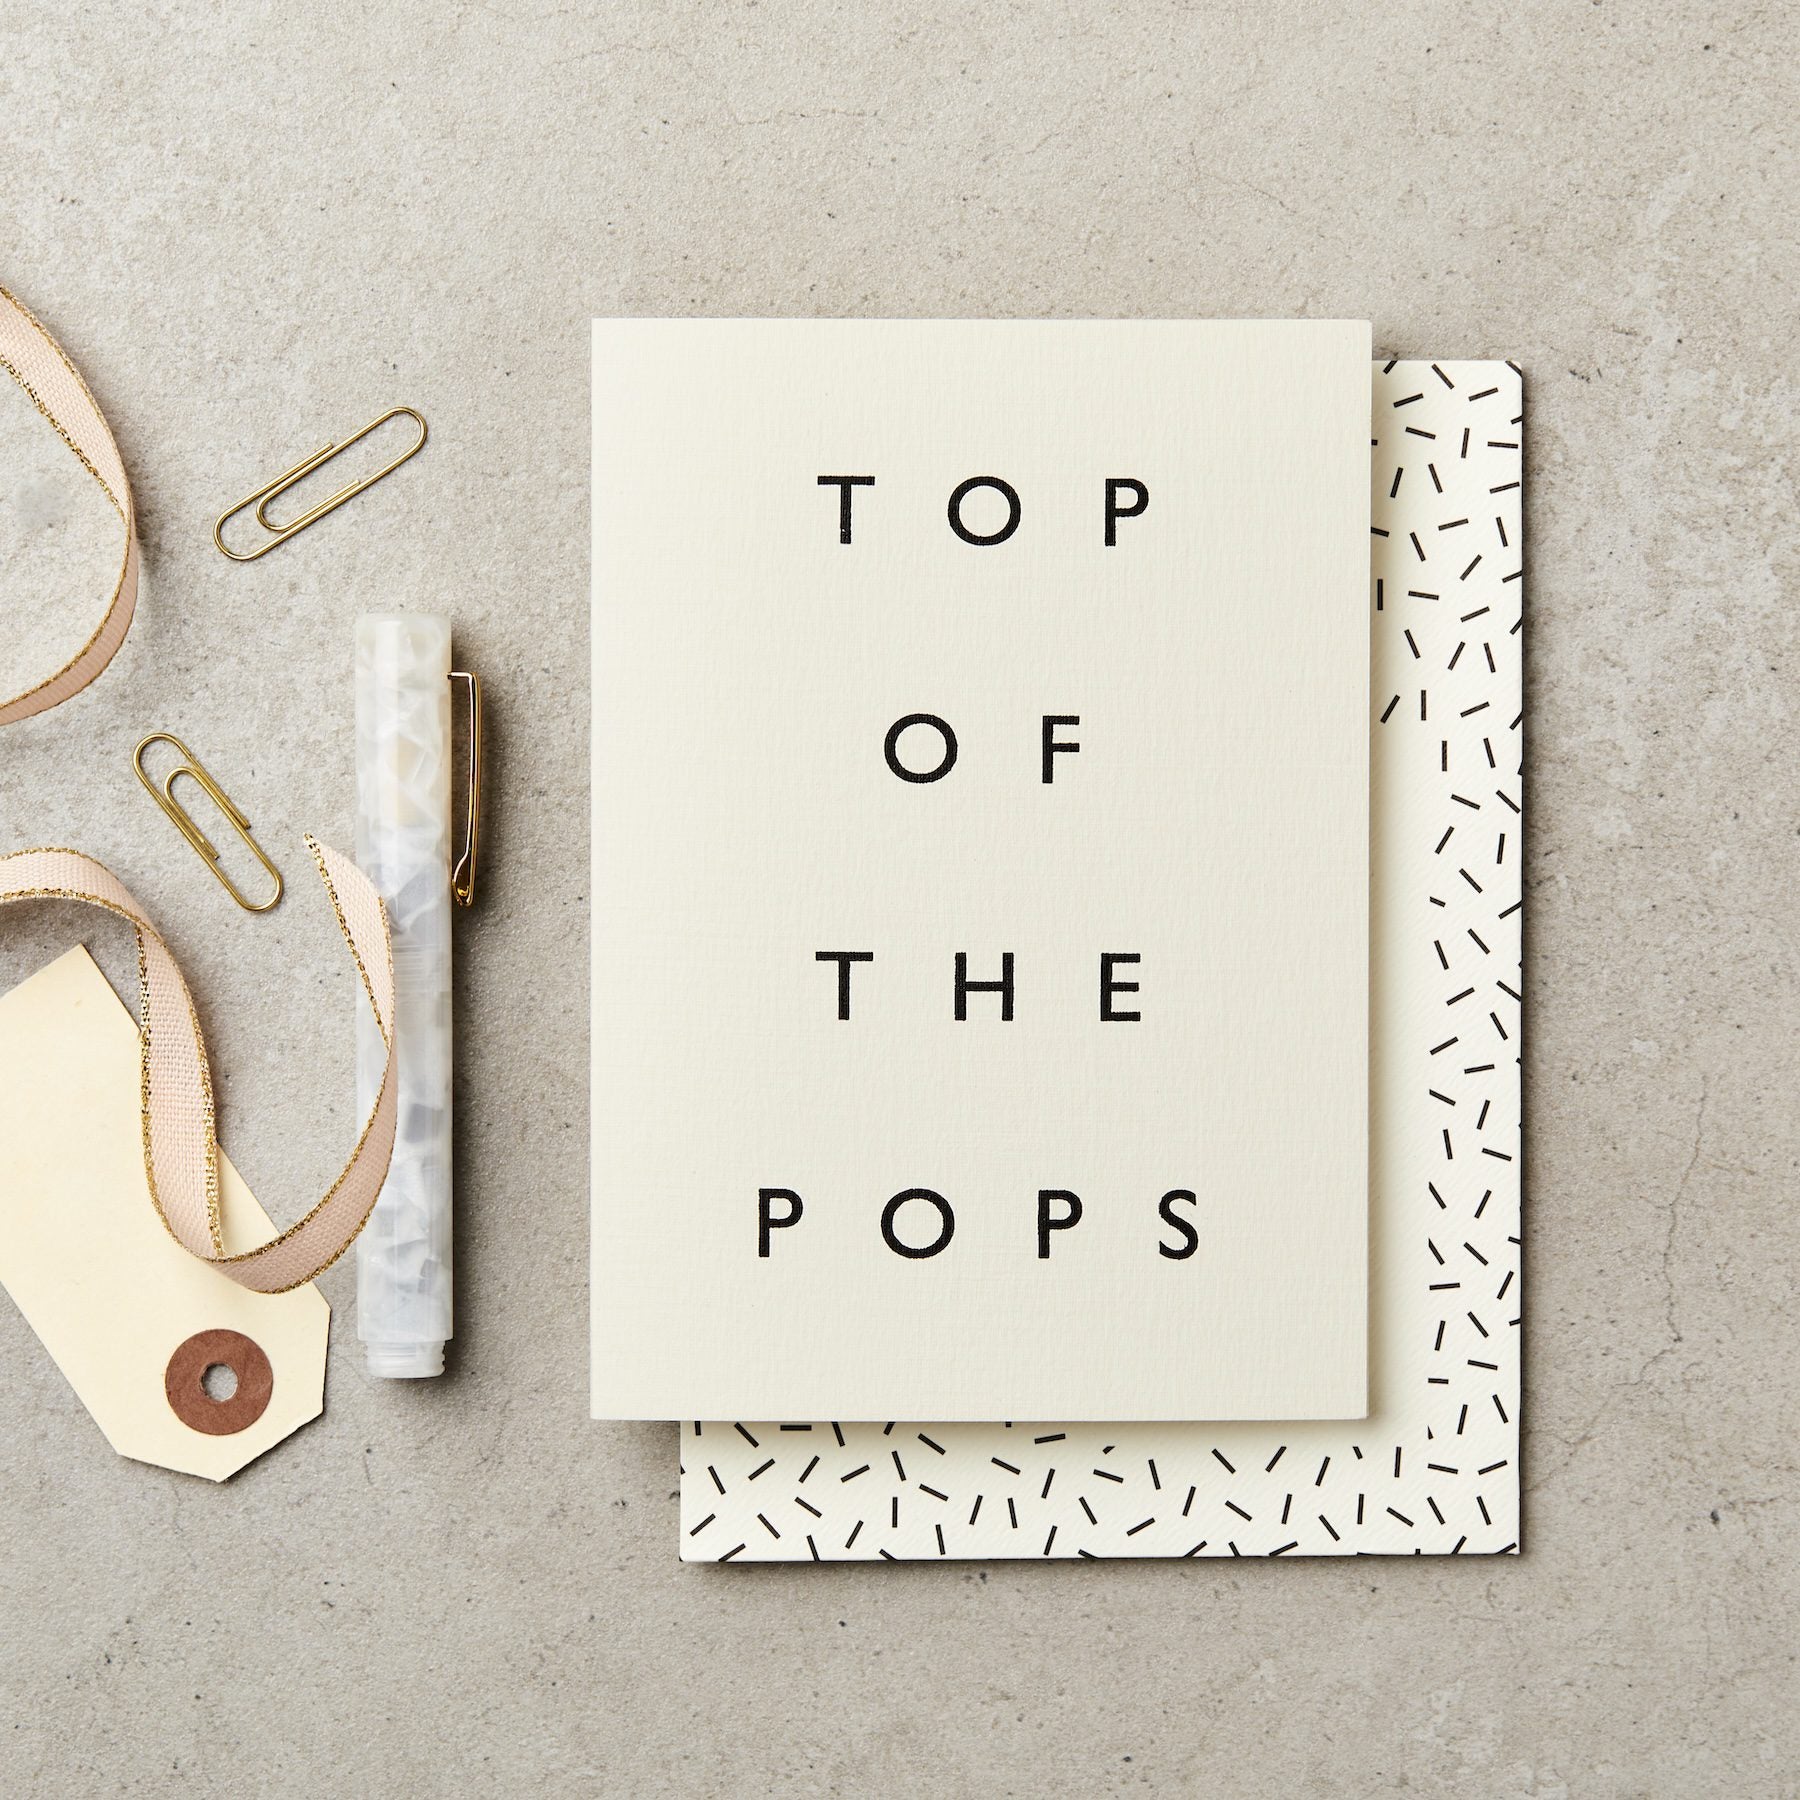 TOP OF THE POPS | CARD BY KATIE LEAMON